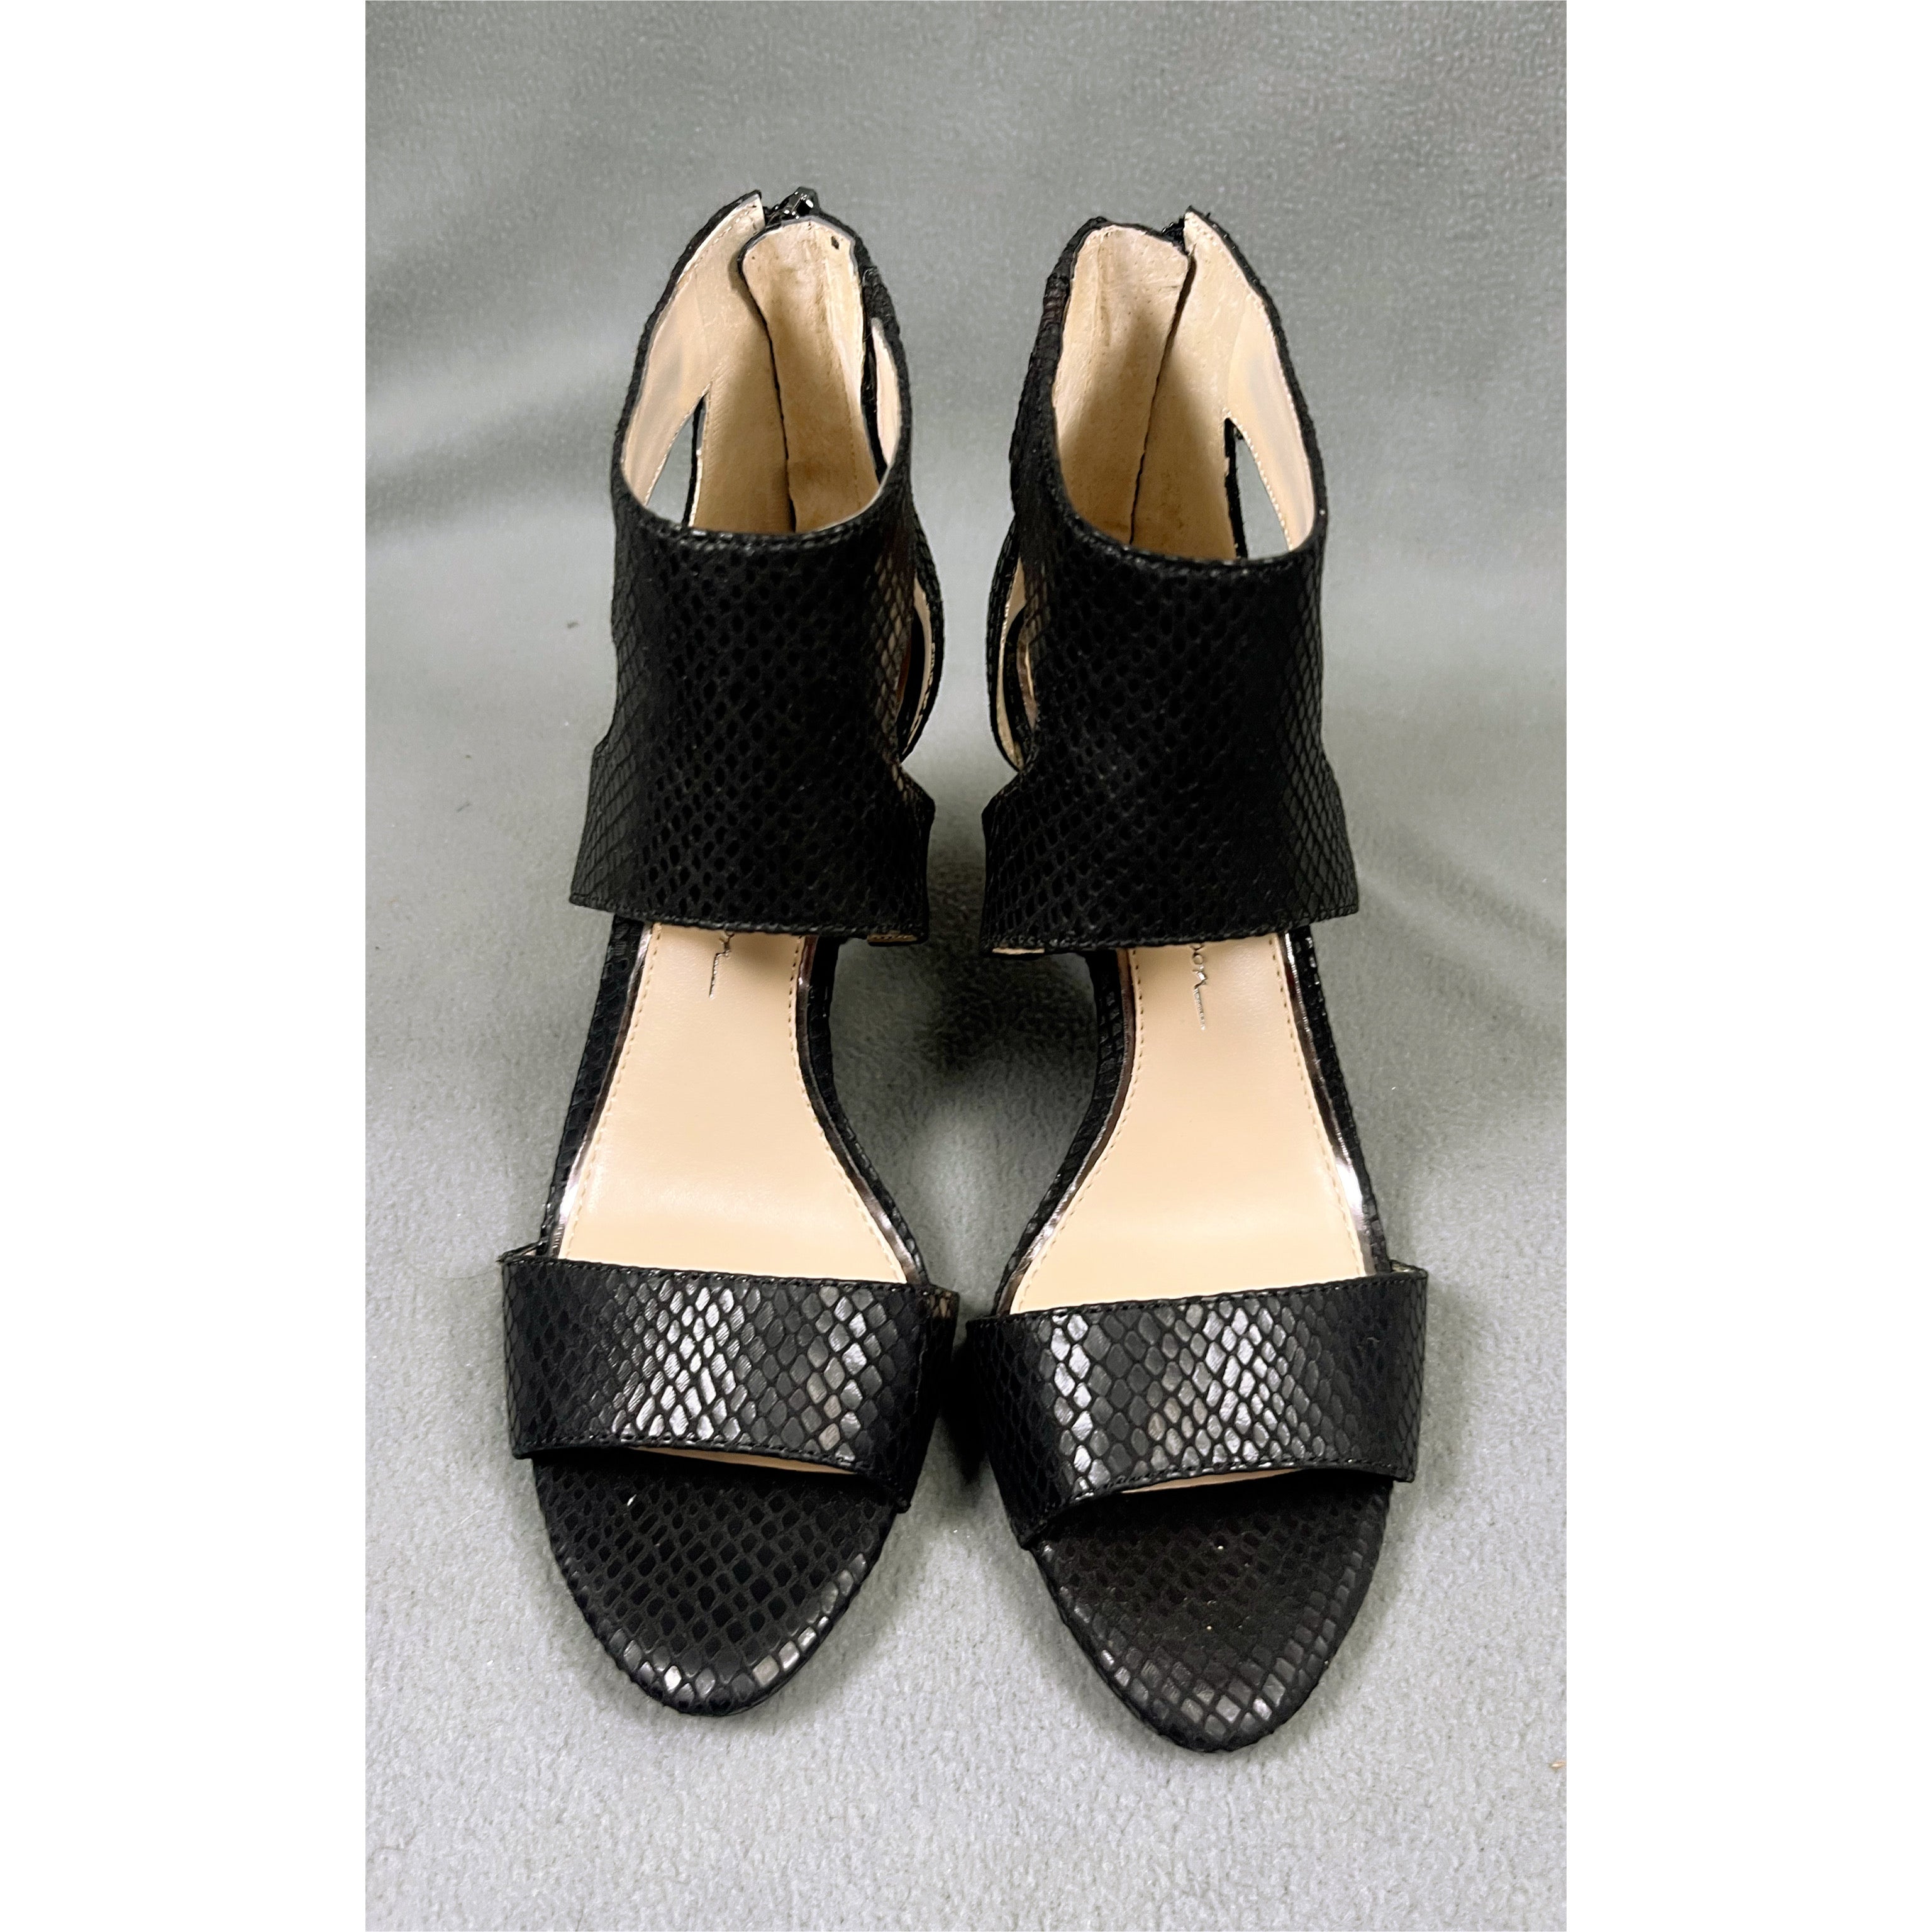 Jessica Simpson black shoes, size 6, NEW IN BOX!